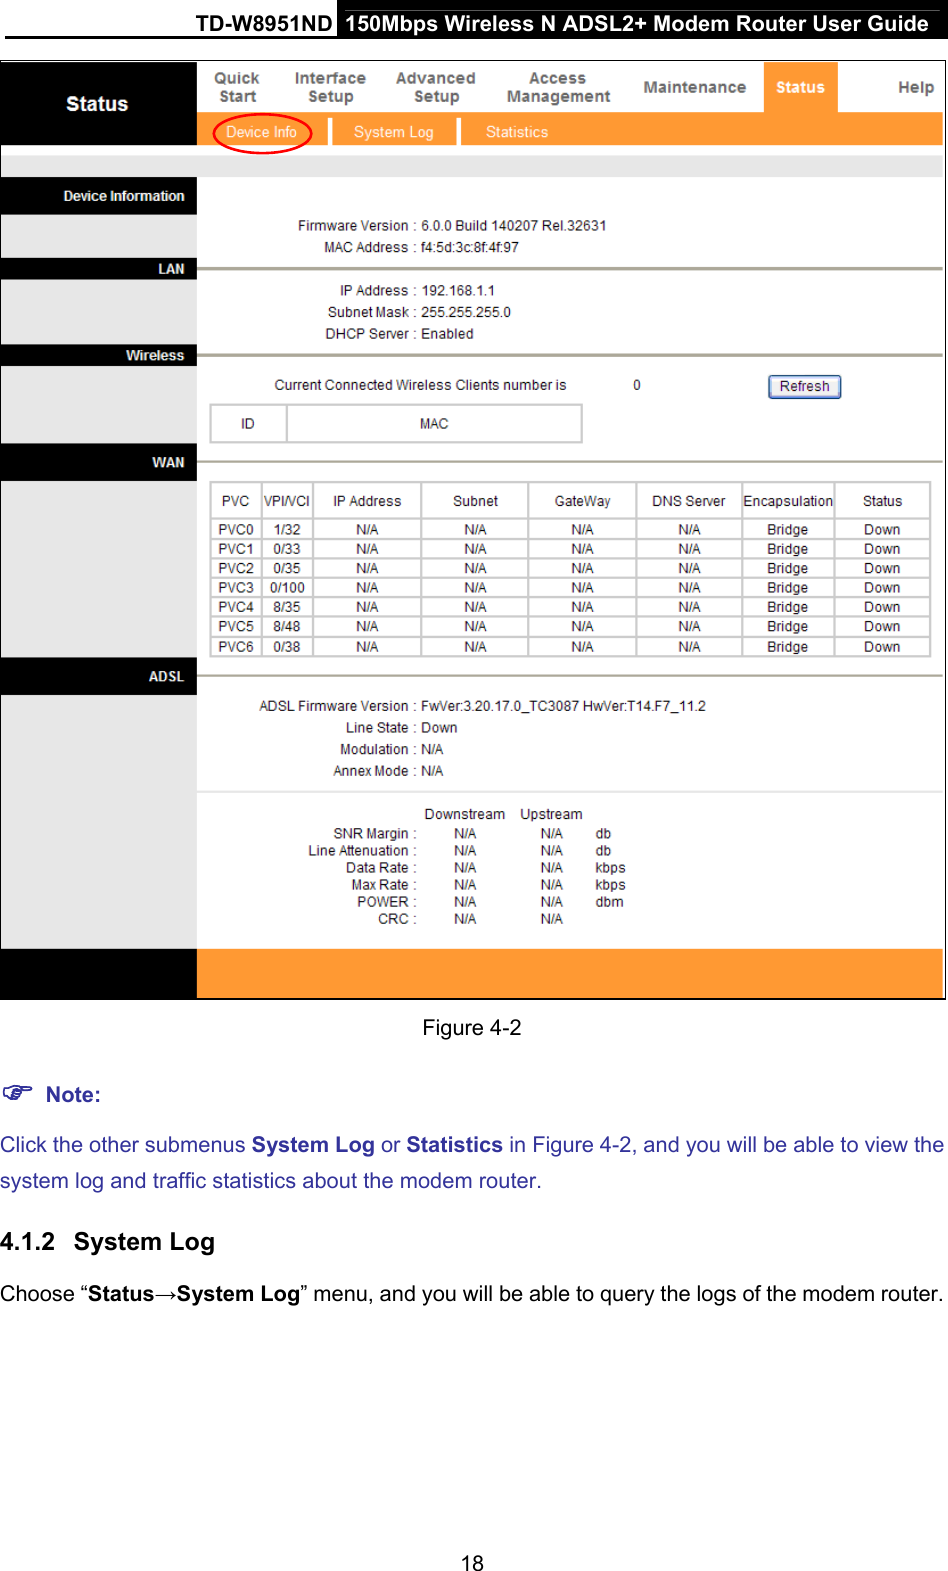 TD-W8951ND  150Mbps Wireless N ADSL2+ Modem Router User Guide  Figure 4-2  Note: Click the other submenus System Log or Statistics in Figure 4-2, and you will be able to view the system log and traffic statistics about the modem router. 4.1.2  System Log Choose “Status→System Log” menu, and you will be able to query the logs of the modem router. 18 